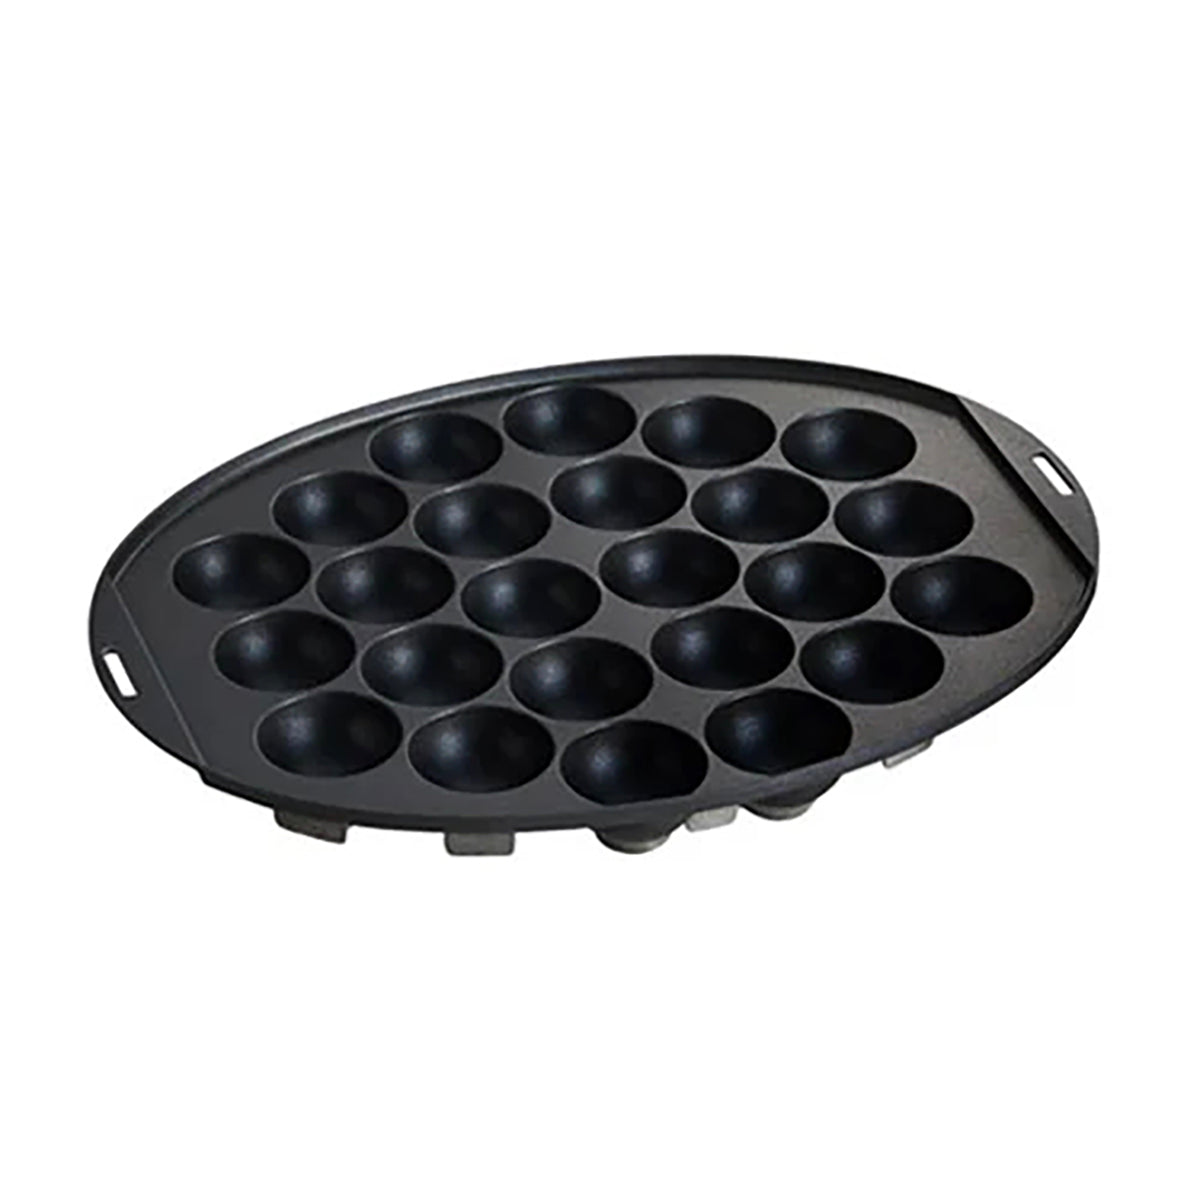 BRUNO Takoyaki Plate (for Oval Hot plate / Replacement)